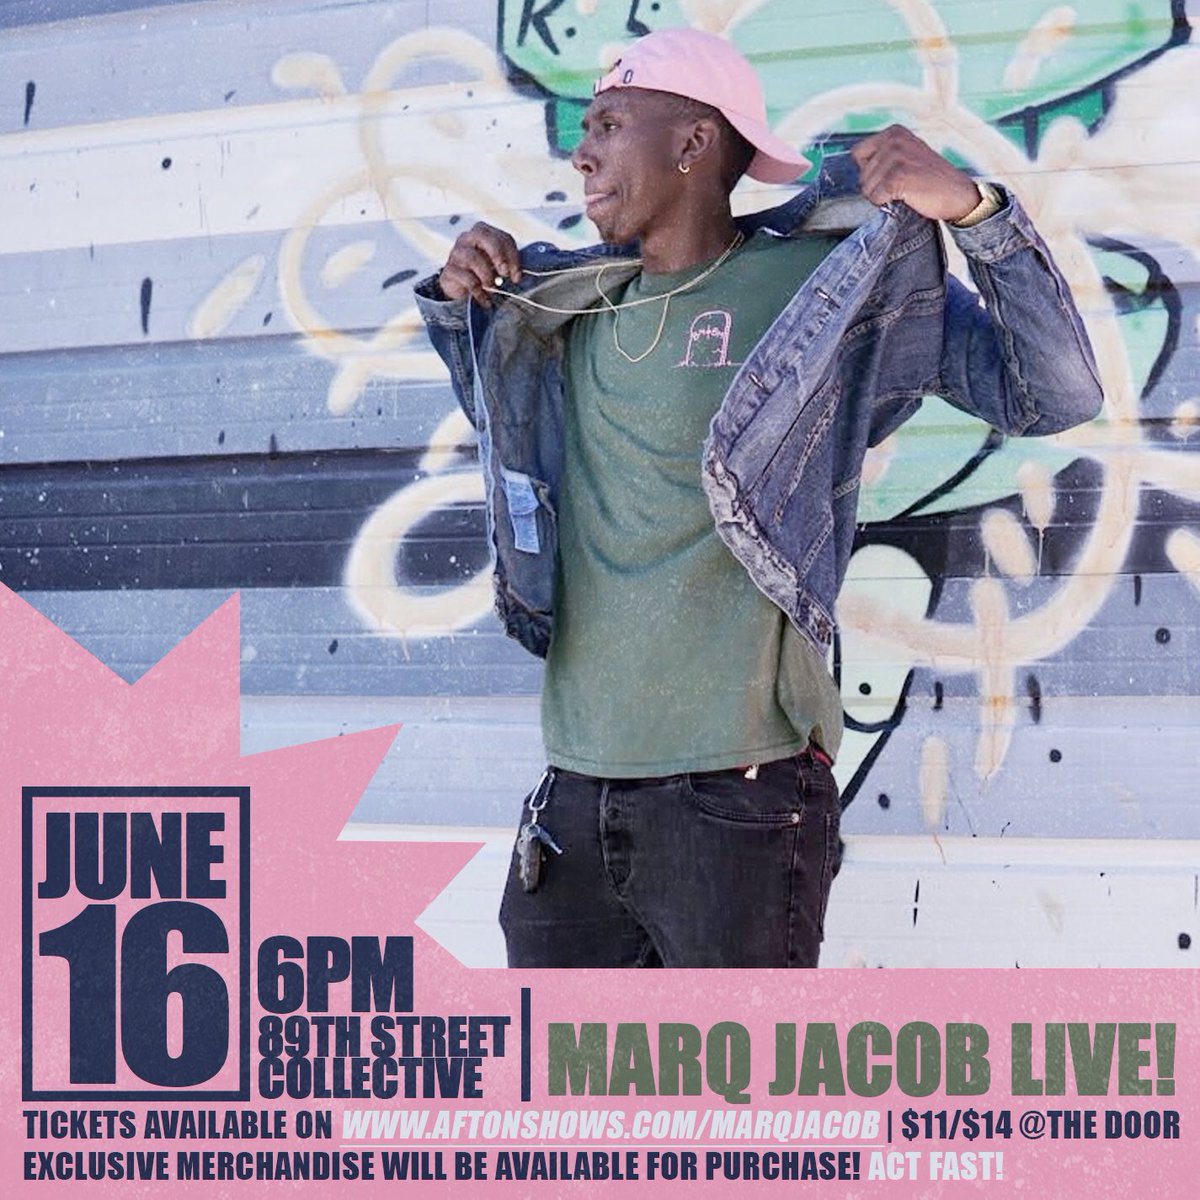 This Friday I got MORE unreleased tracks! I'm trying to show y'all I got this shit on lock! Come True! #MarqJacobLive #OKCShows